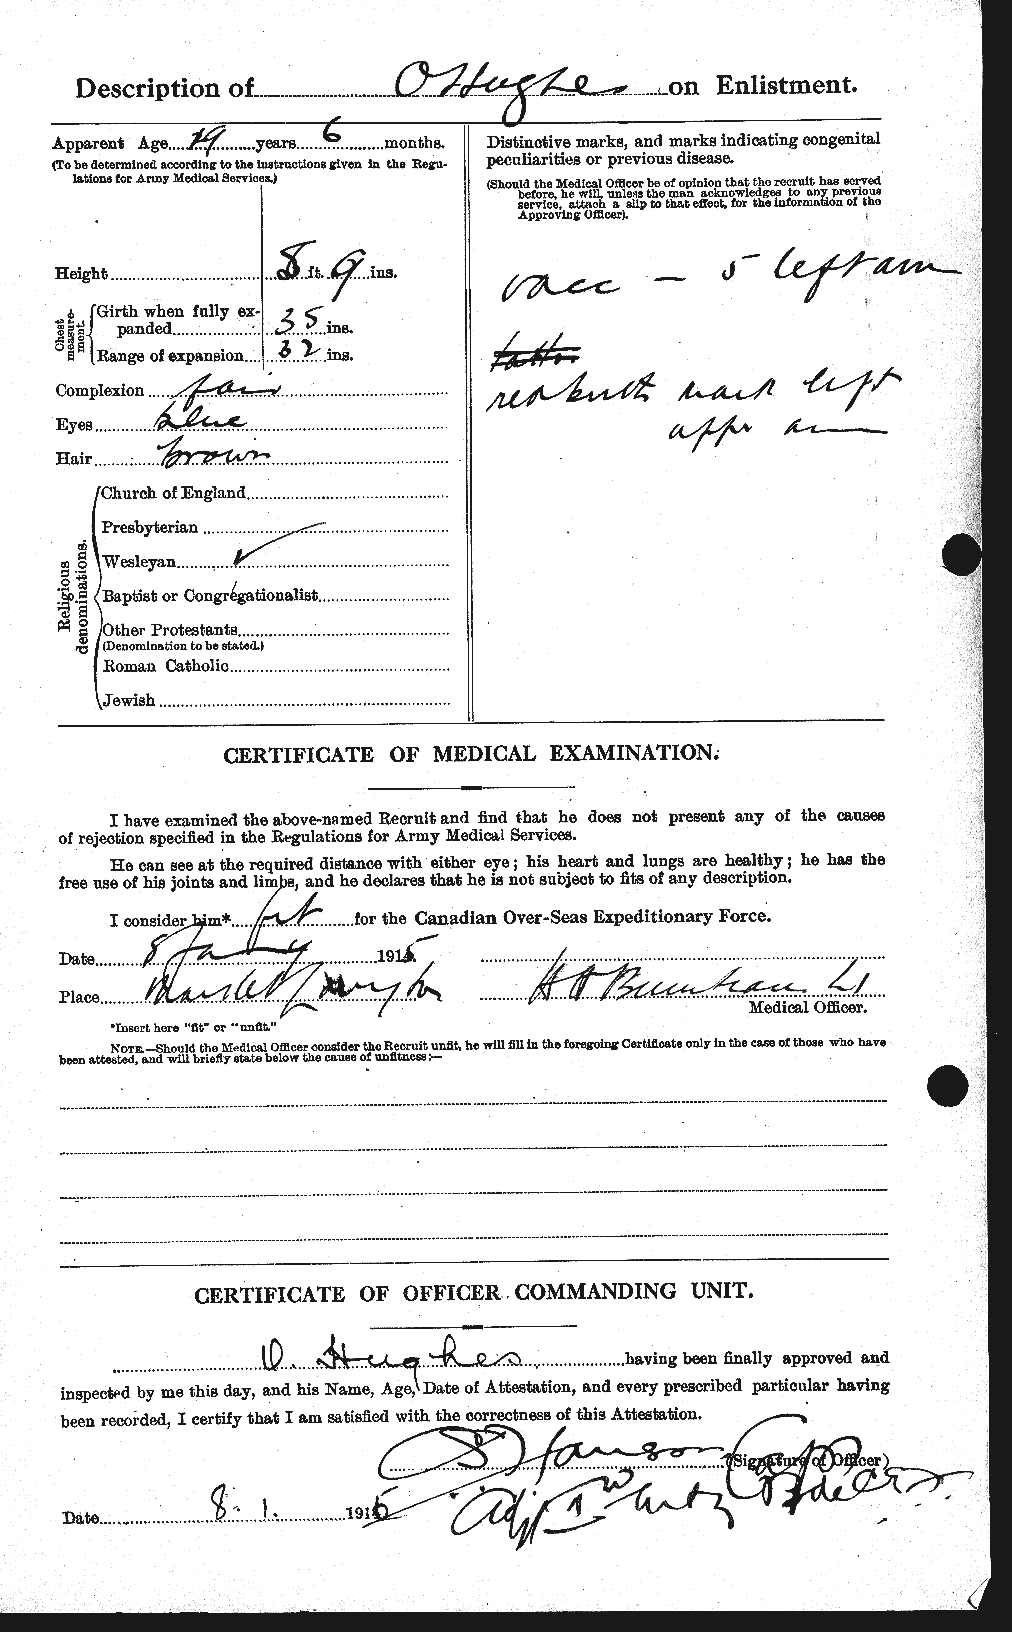 Personnel Records of the First World War - CEF 404141b